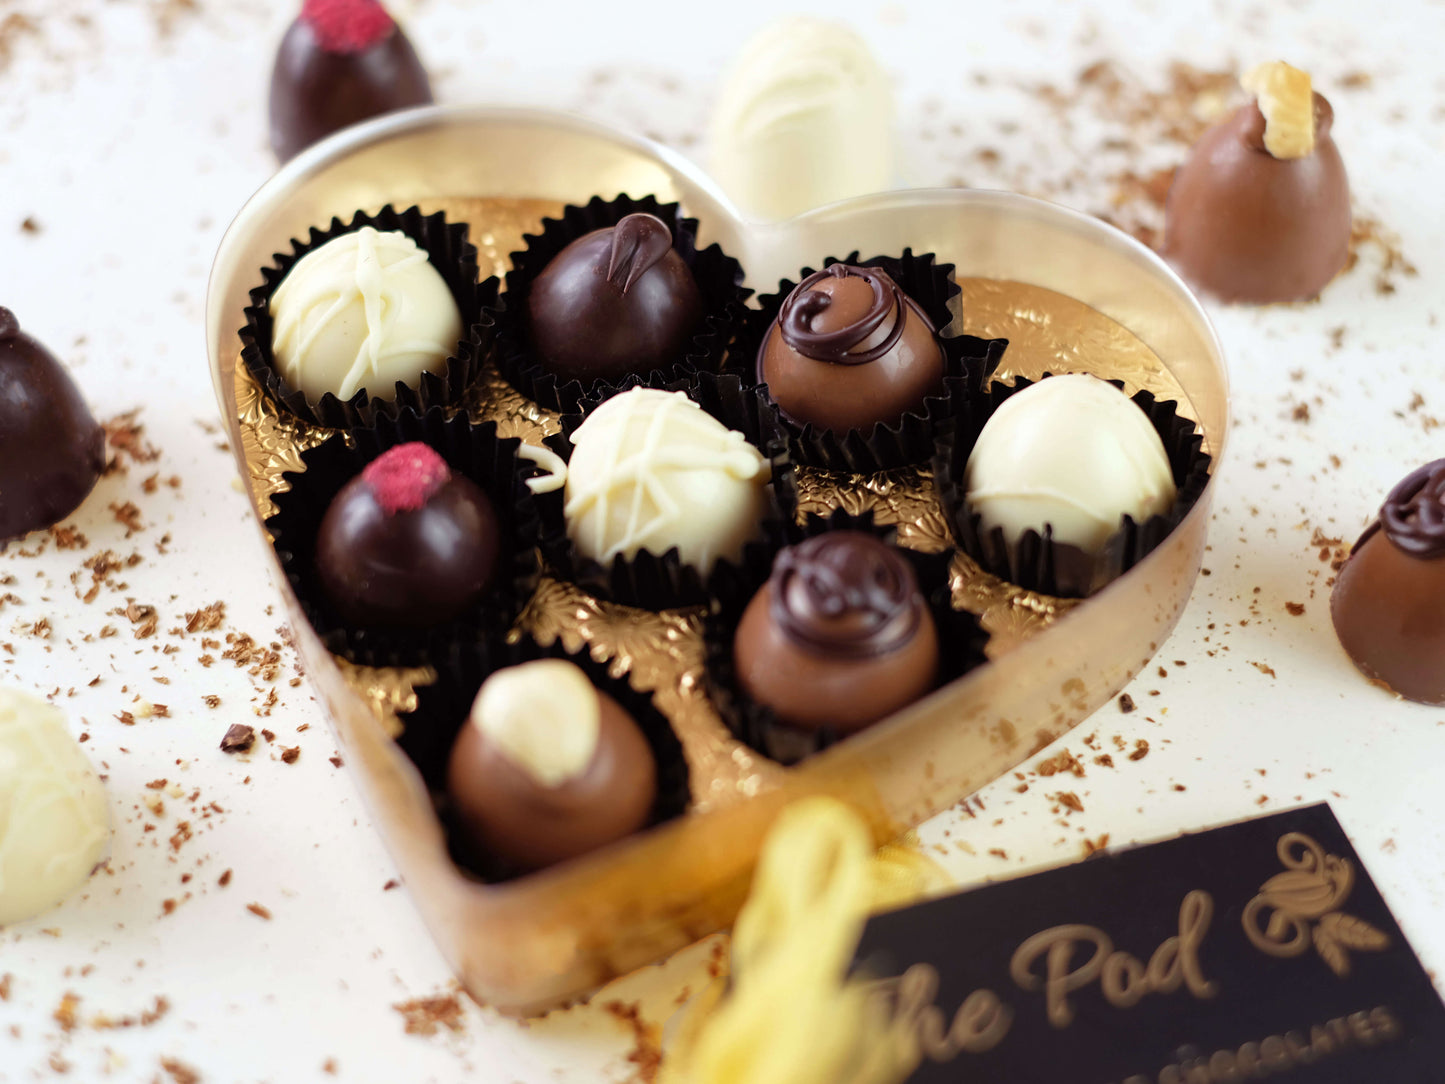 image shows an open heart shaped gift box of 8 sugar free chocolates